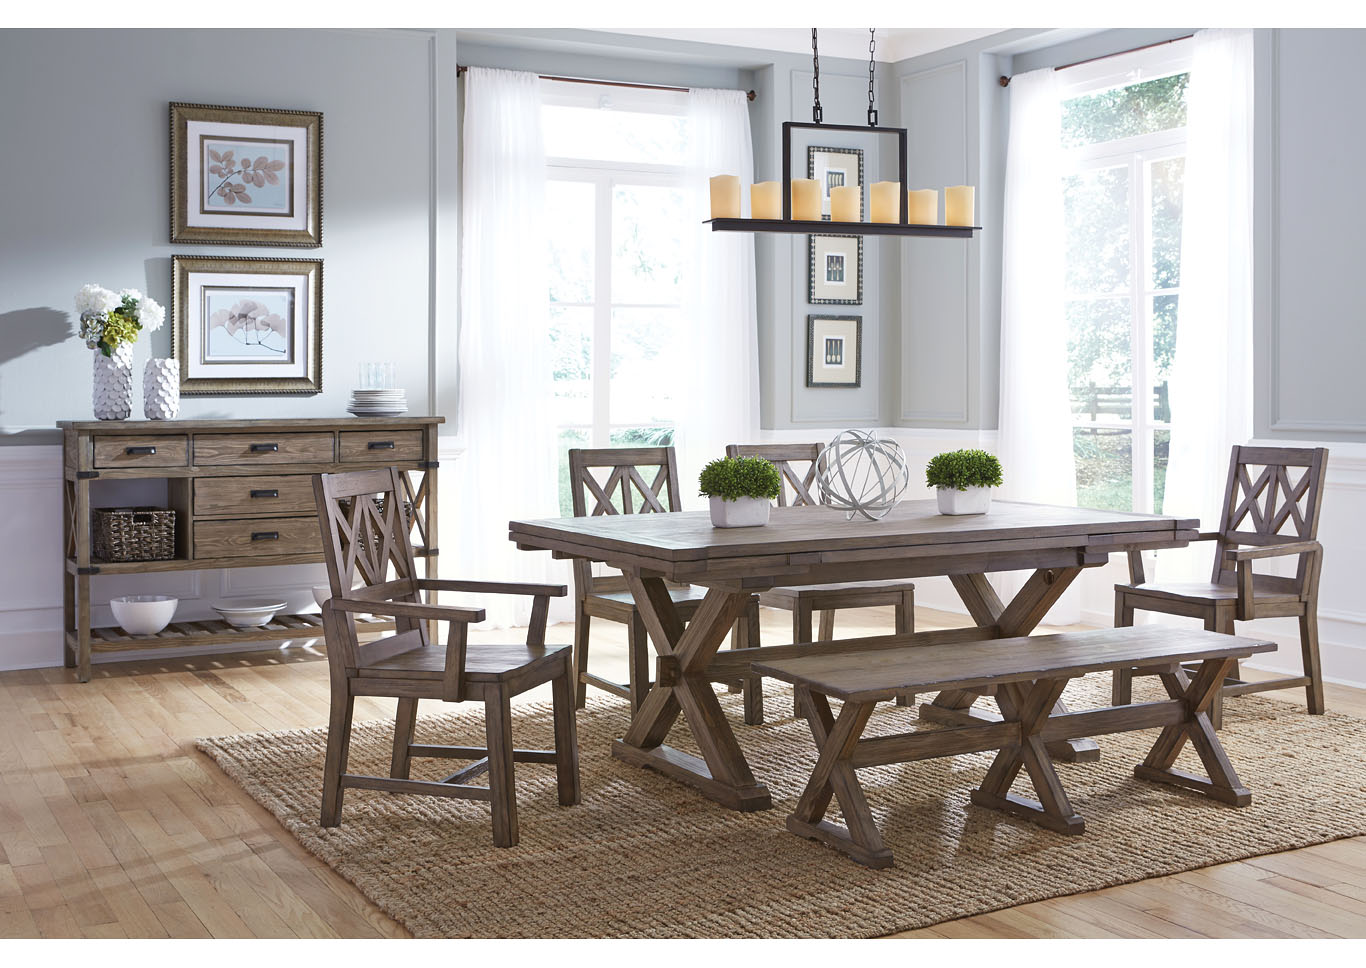 Foundry Driftwood Dining Set w/2 Wood Side Chairs, 2 Wood Arm Chairs & Bench,Kincaid